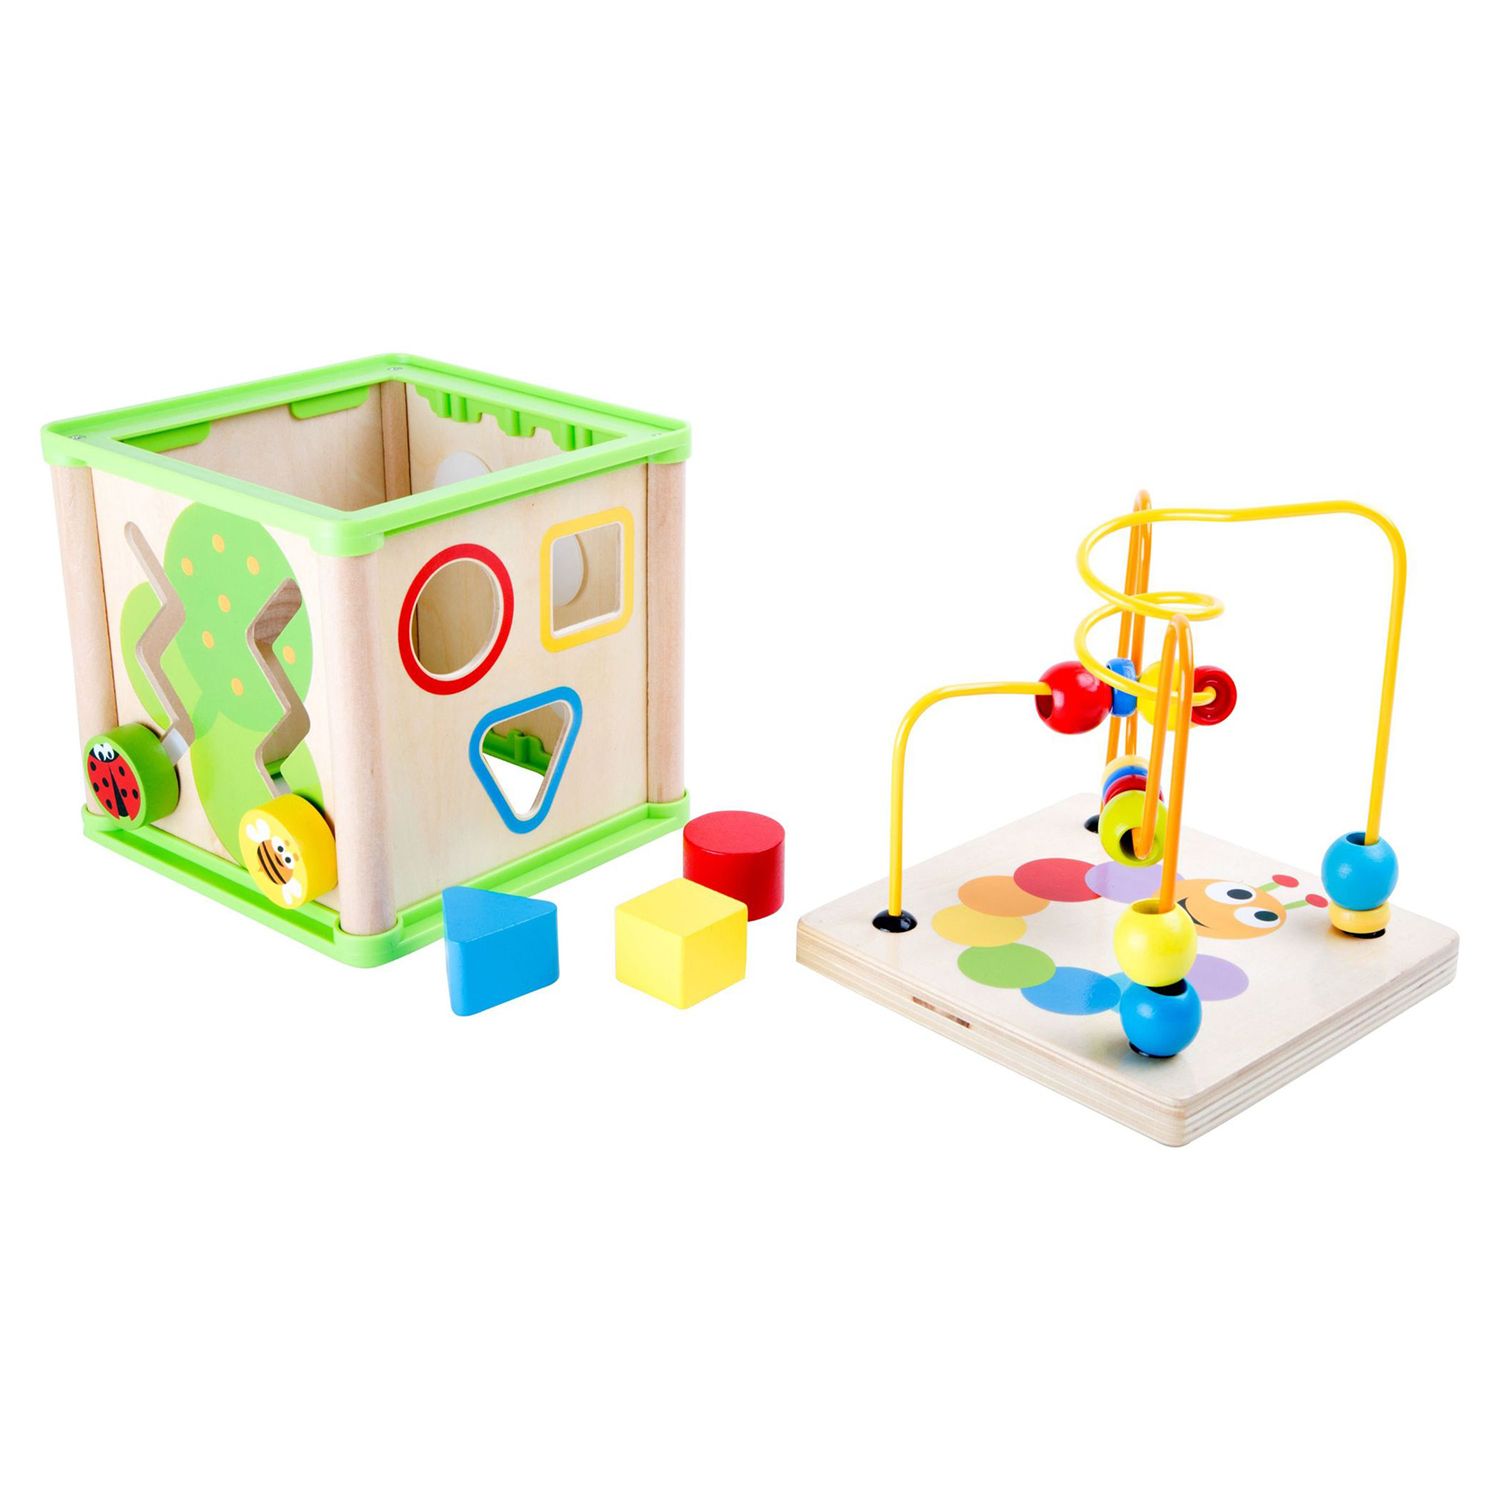 small wooden activity cube